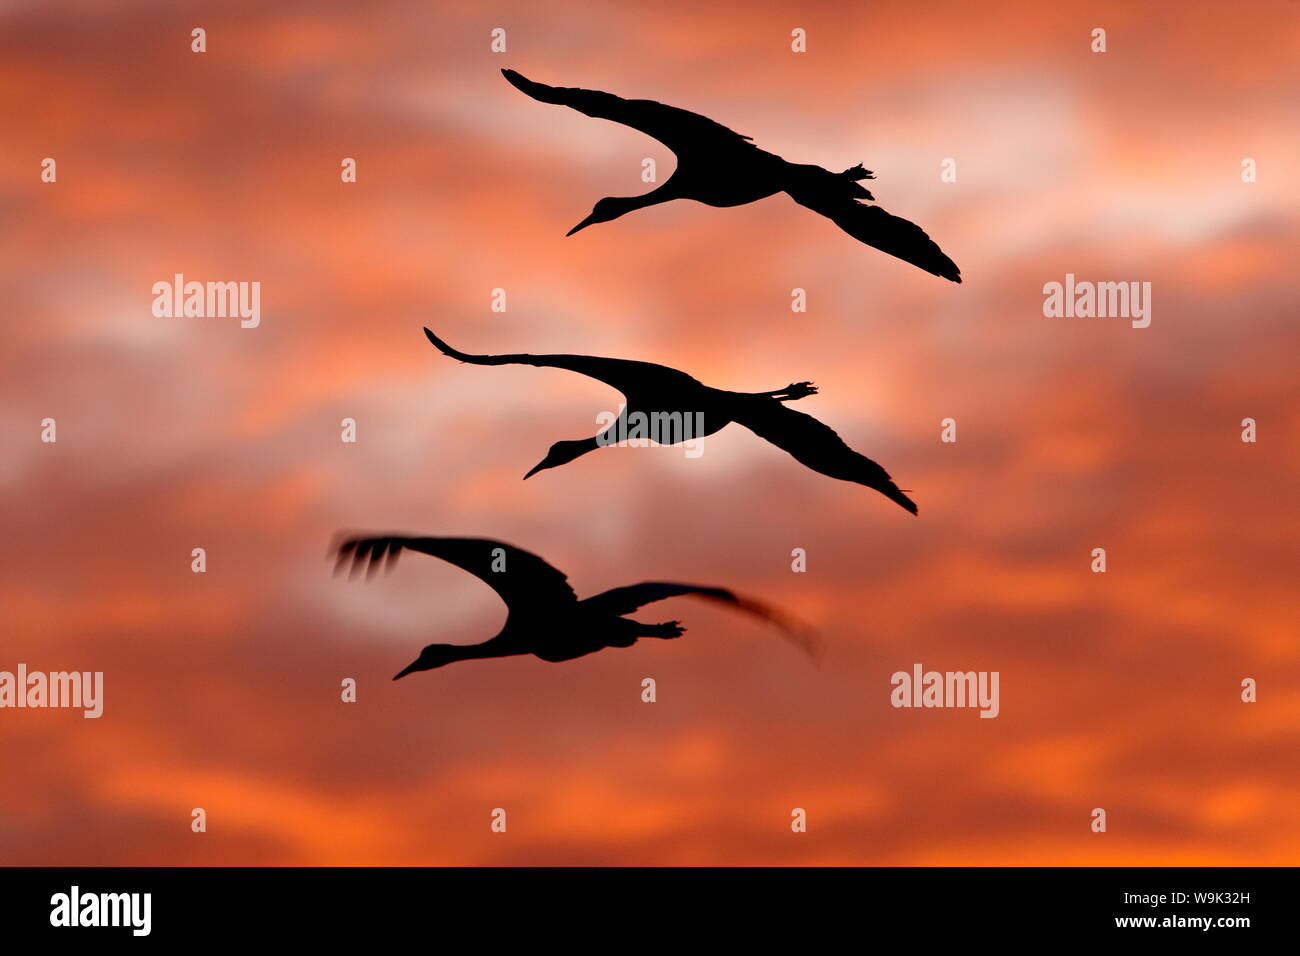 Three Sandhill Cranes (Grus canadensis) in flight silhouetted against red clouds, Bernardo Wildlife Area, New Mexico, USA Stock Photo